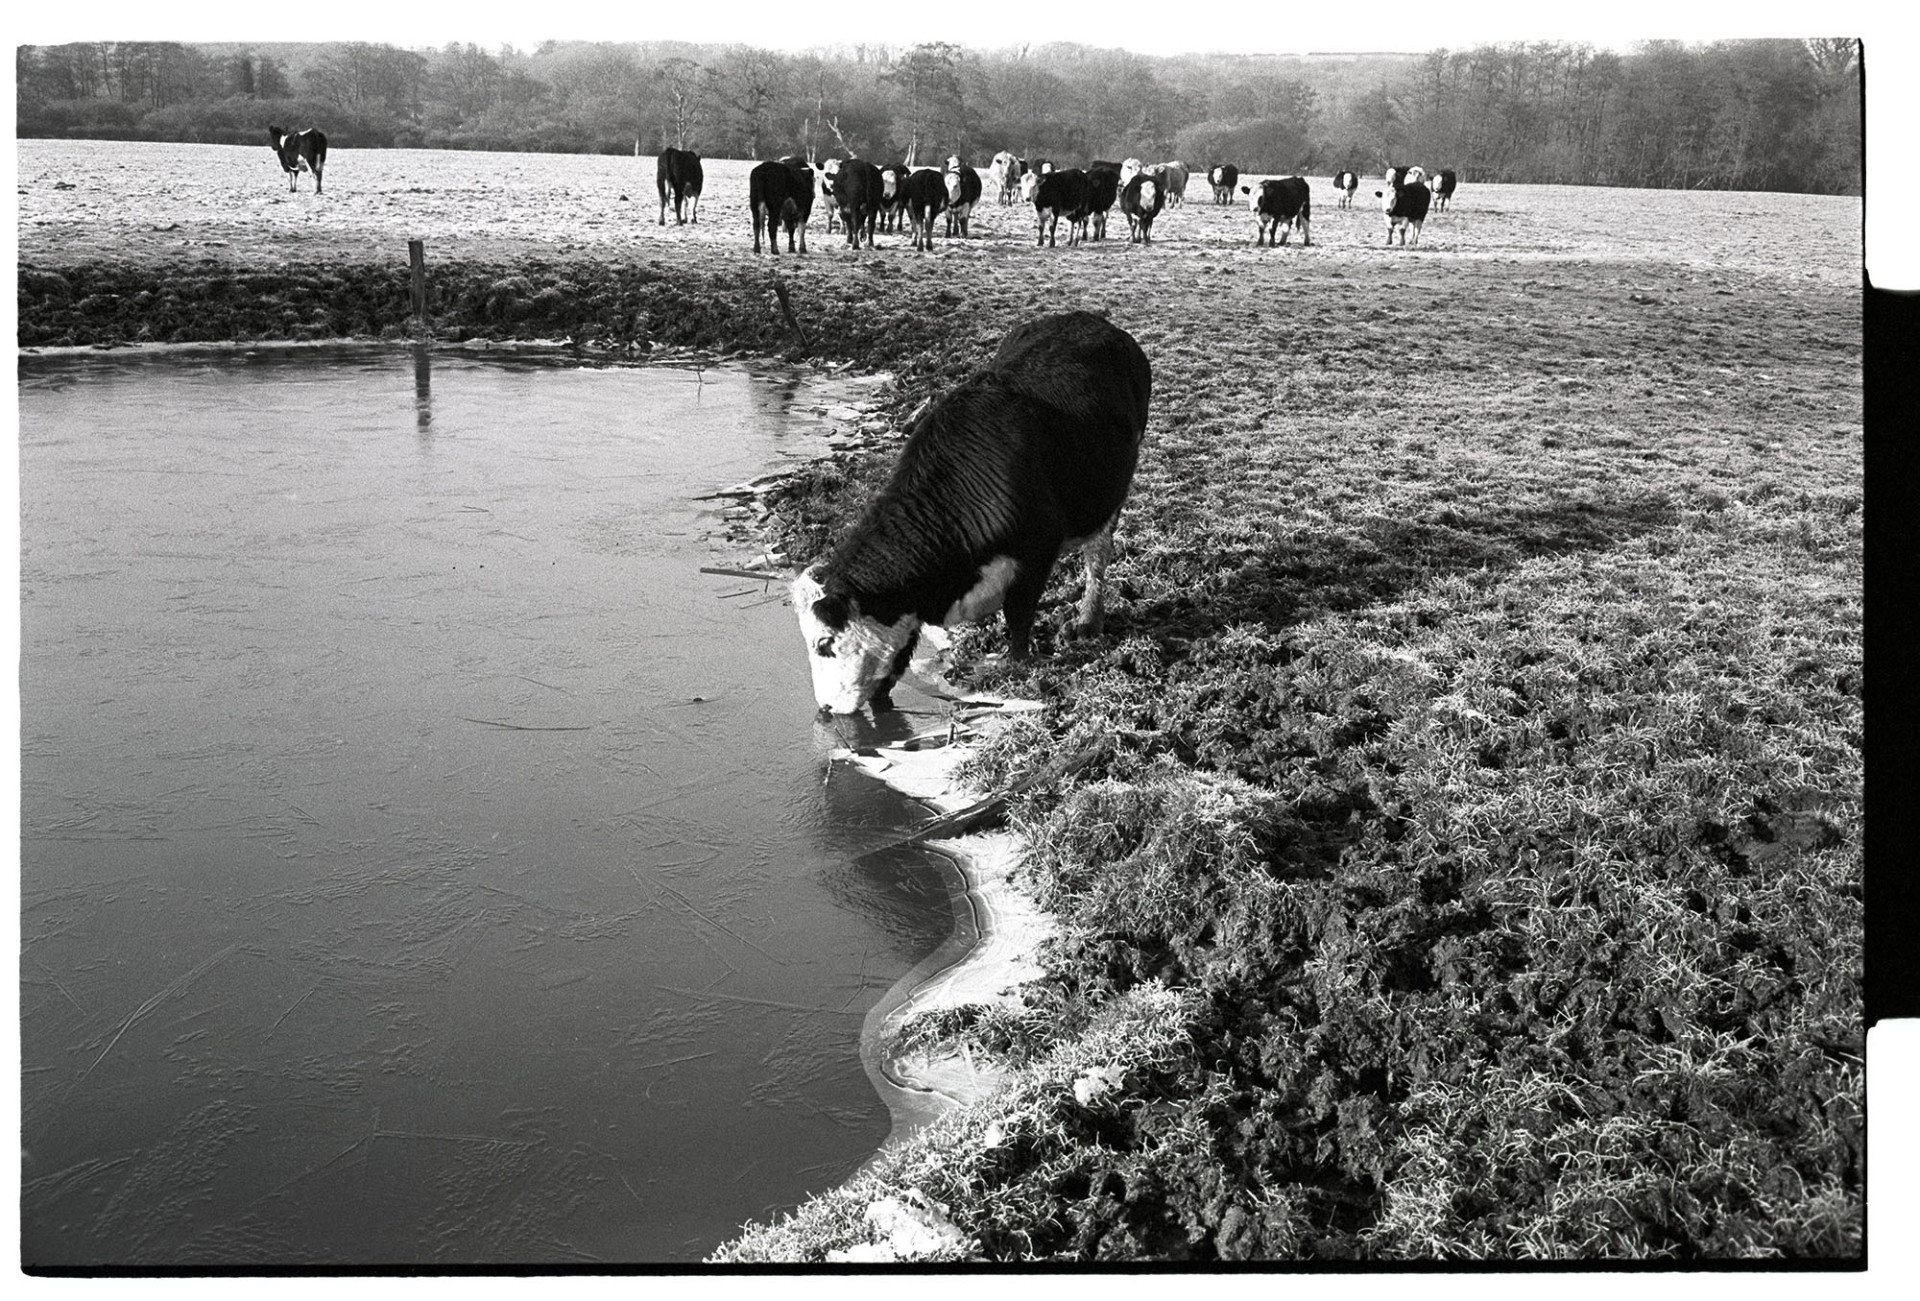 Cow, Bullock drinking from frozen pond, ice. <br />
[A bullock drinking from a pond which has frozen over in a field at Bridgetown, Iddesleigh. Other bullocks are in the field in the background.]